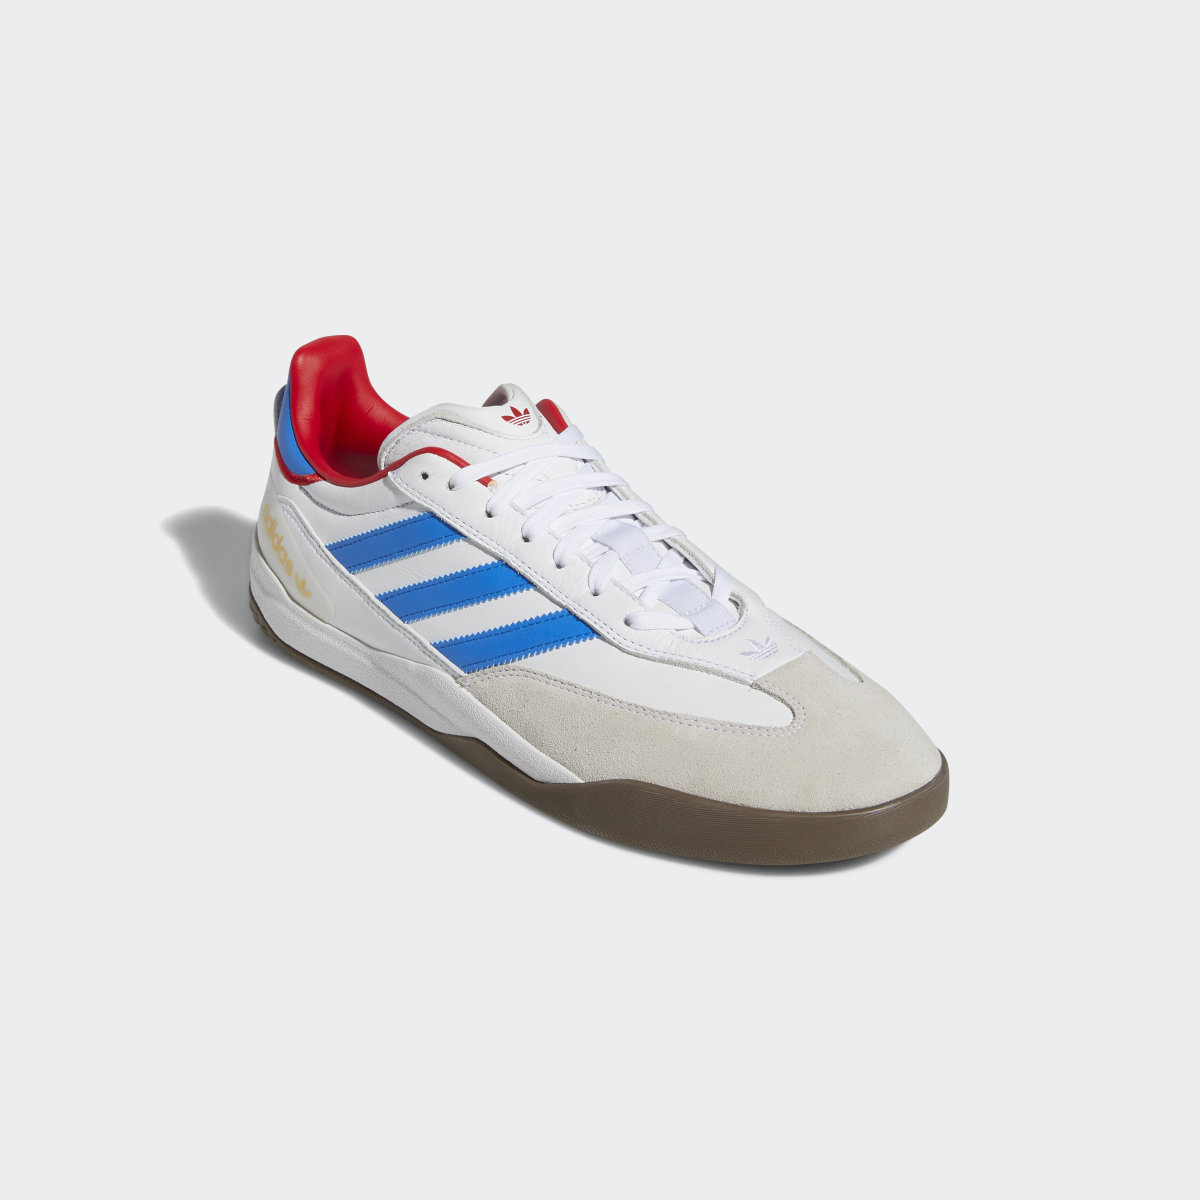 Adidas Copa Nationale Shoes. 7